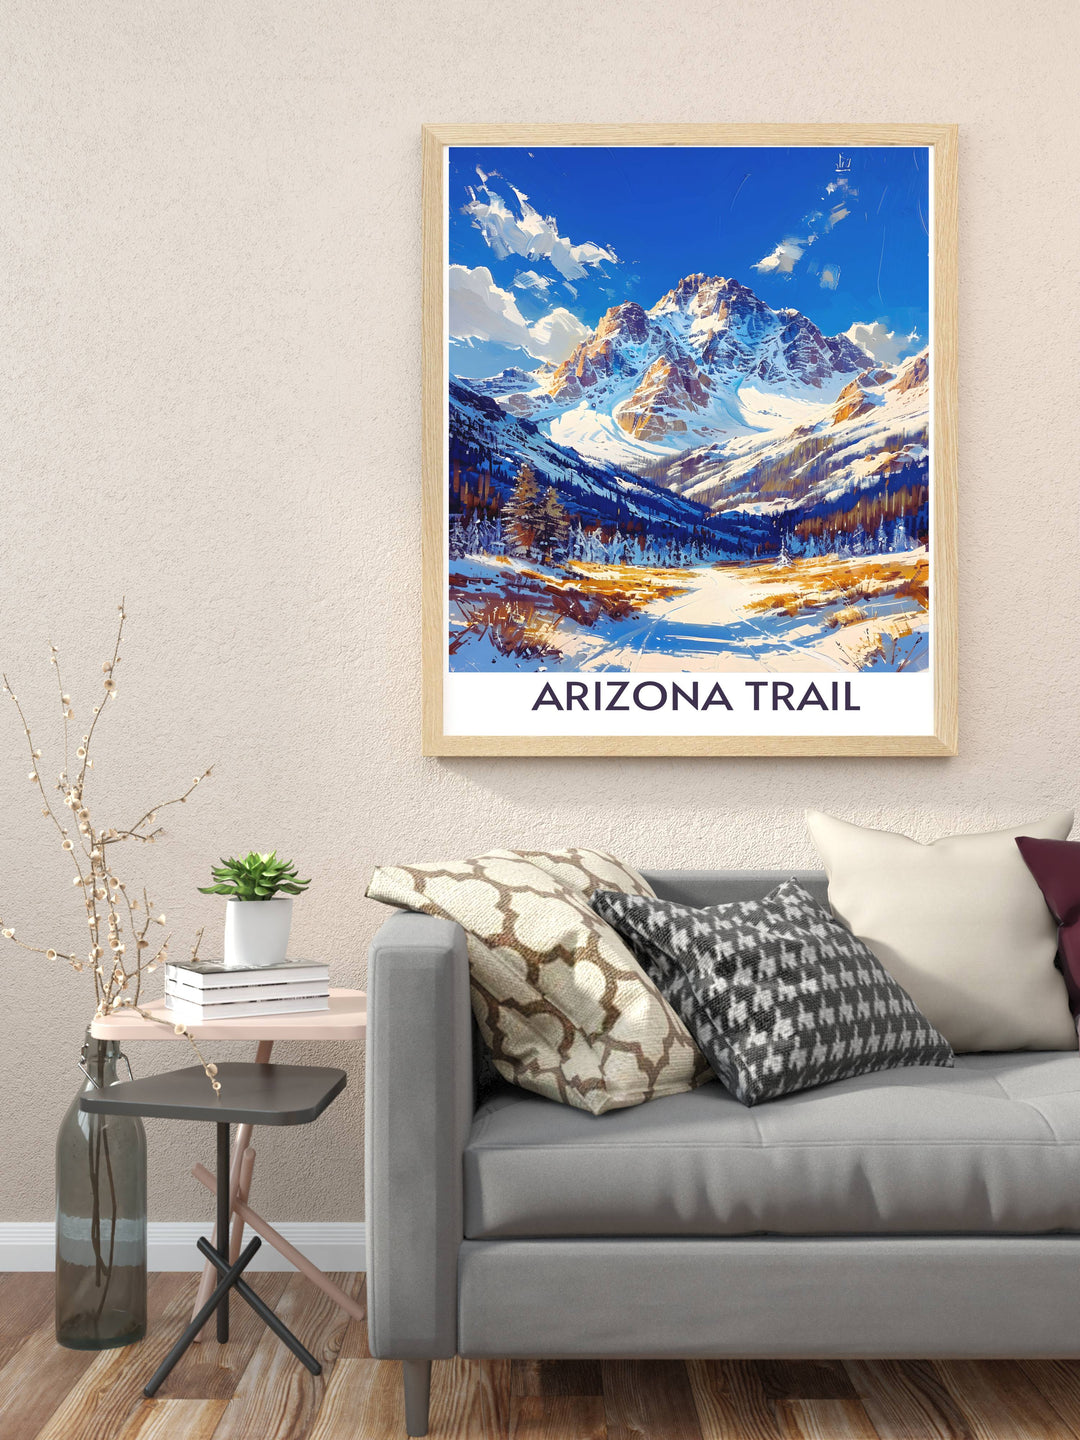 Framed print of San Francisco Peaks Park capturing the majestic beauty of the desert landscape a timeless piece of art for any decor perfect as a gift for hikers and nature enthusiasts.